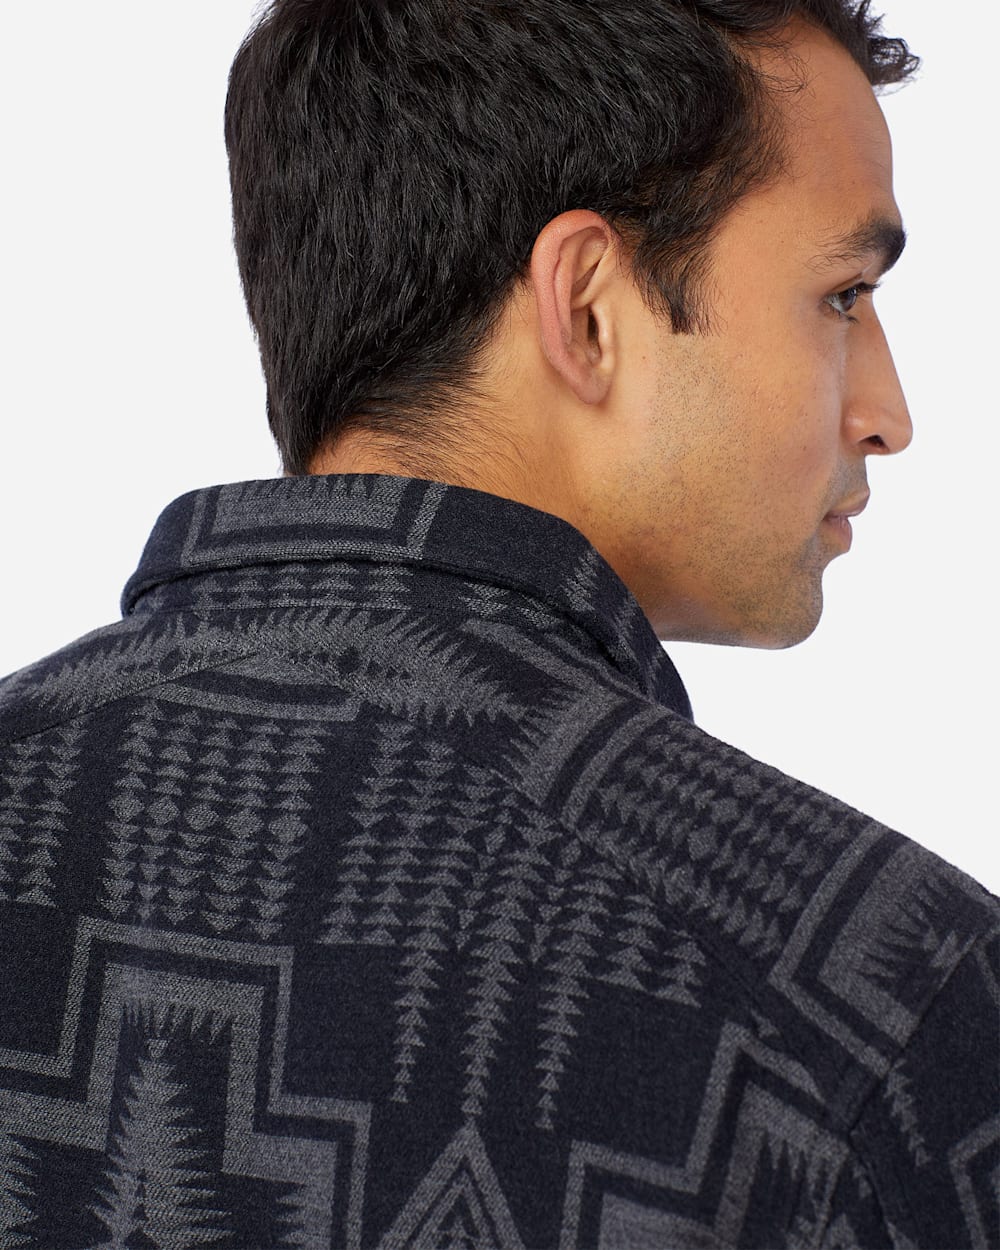 ALTERNATE VIEW OF MEN'S DOUBLESOFT FLANNEL BEACH SHIRT IN BLACK/GREY HARDING image number 5